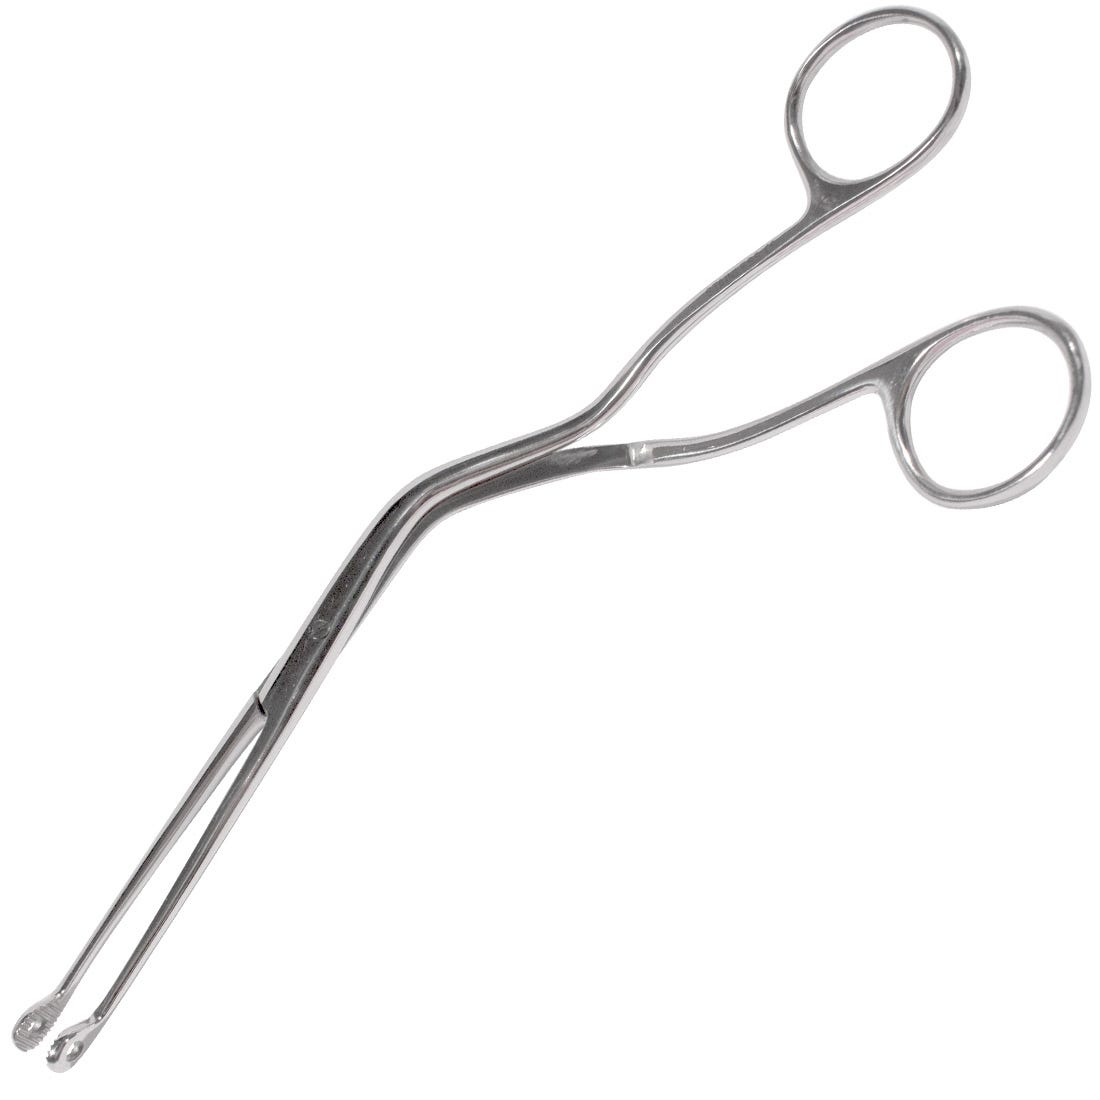 ACE Magill Forcep child, 7-1/2", 19cm